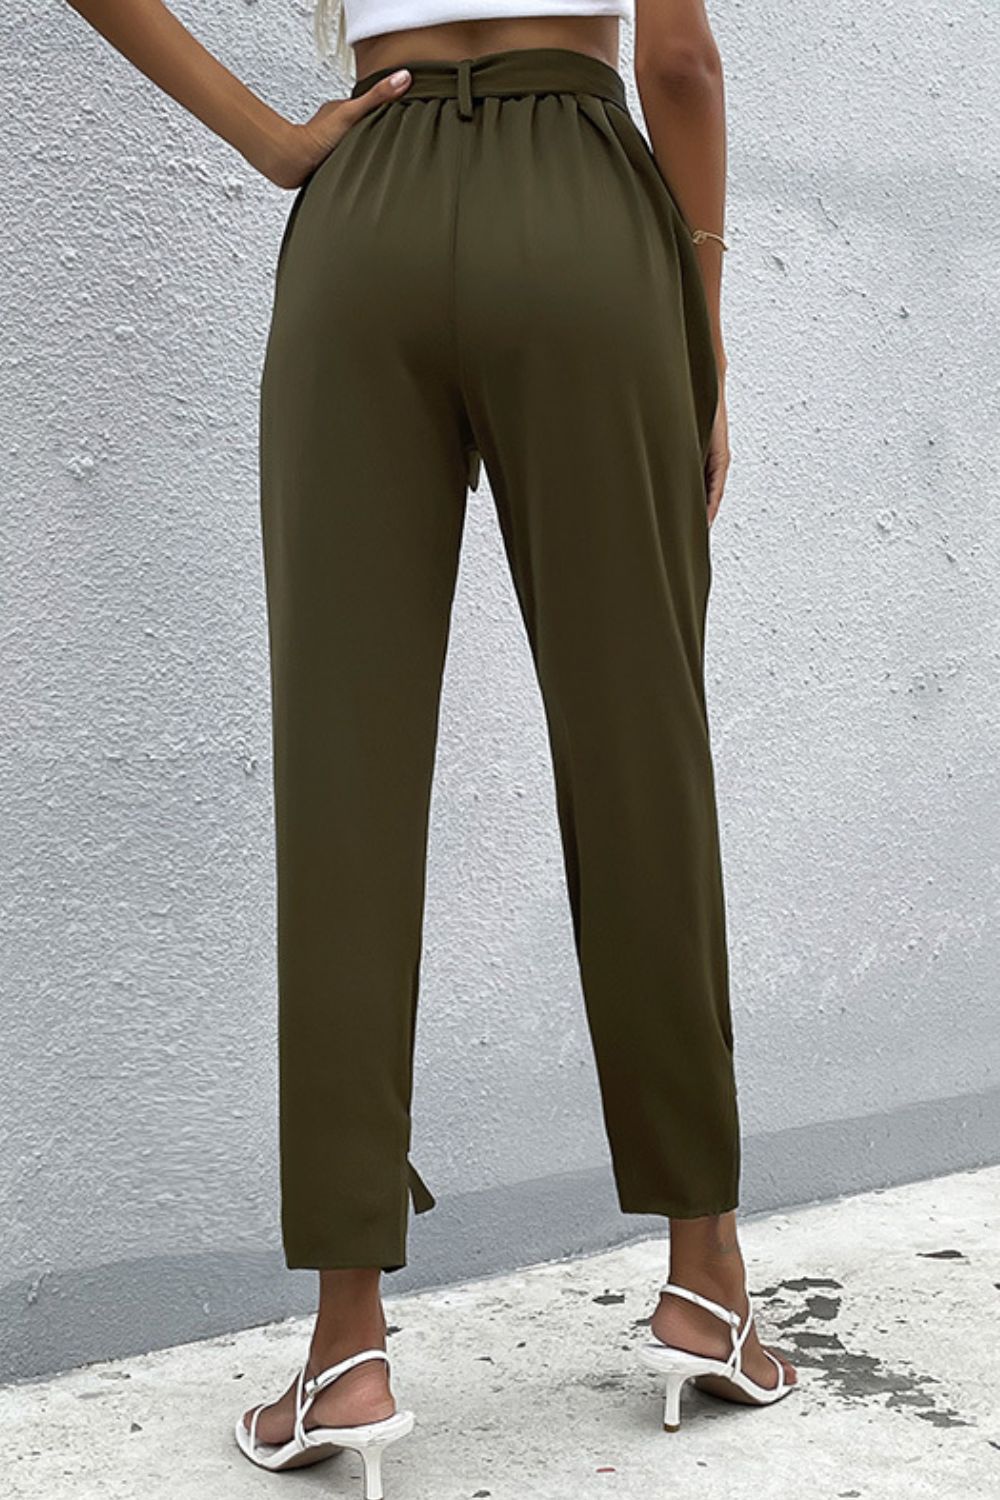 Tie Detail Belted Pants with Pockets COCO CRESS